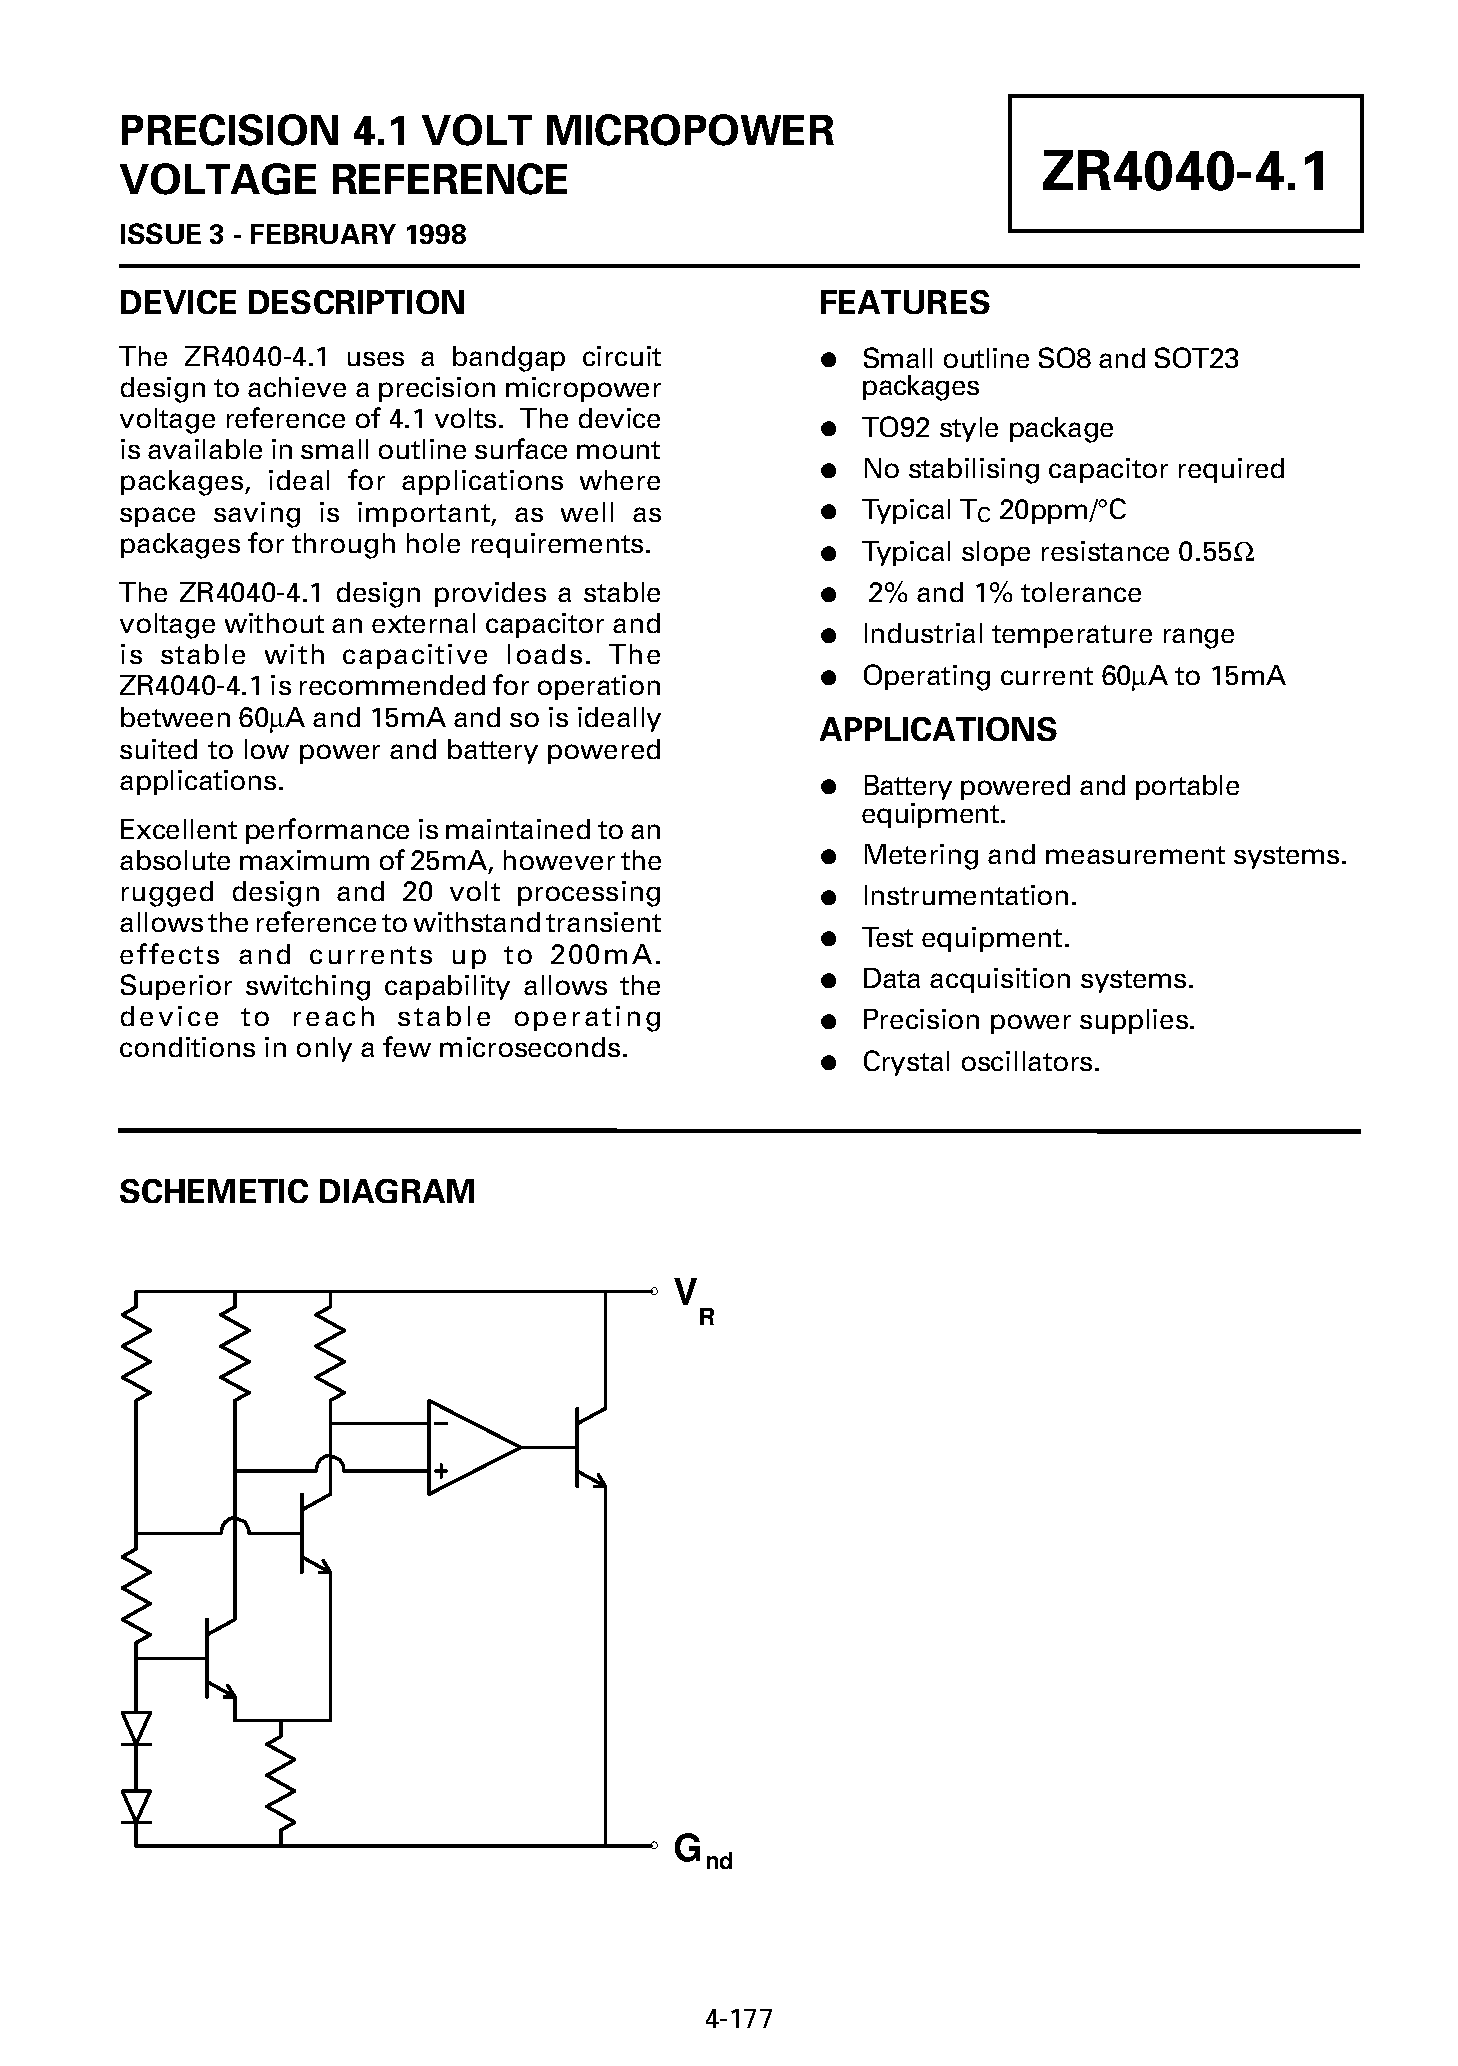 Datasheet ZR40402F41 - PRECISION 4.1 VOLT MICROPOWER VOLTAGE REFERENCE page 1